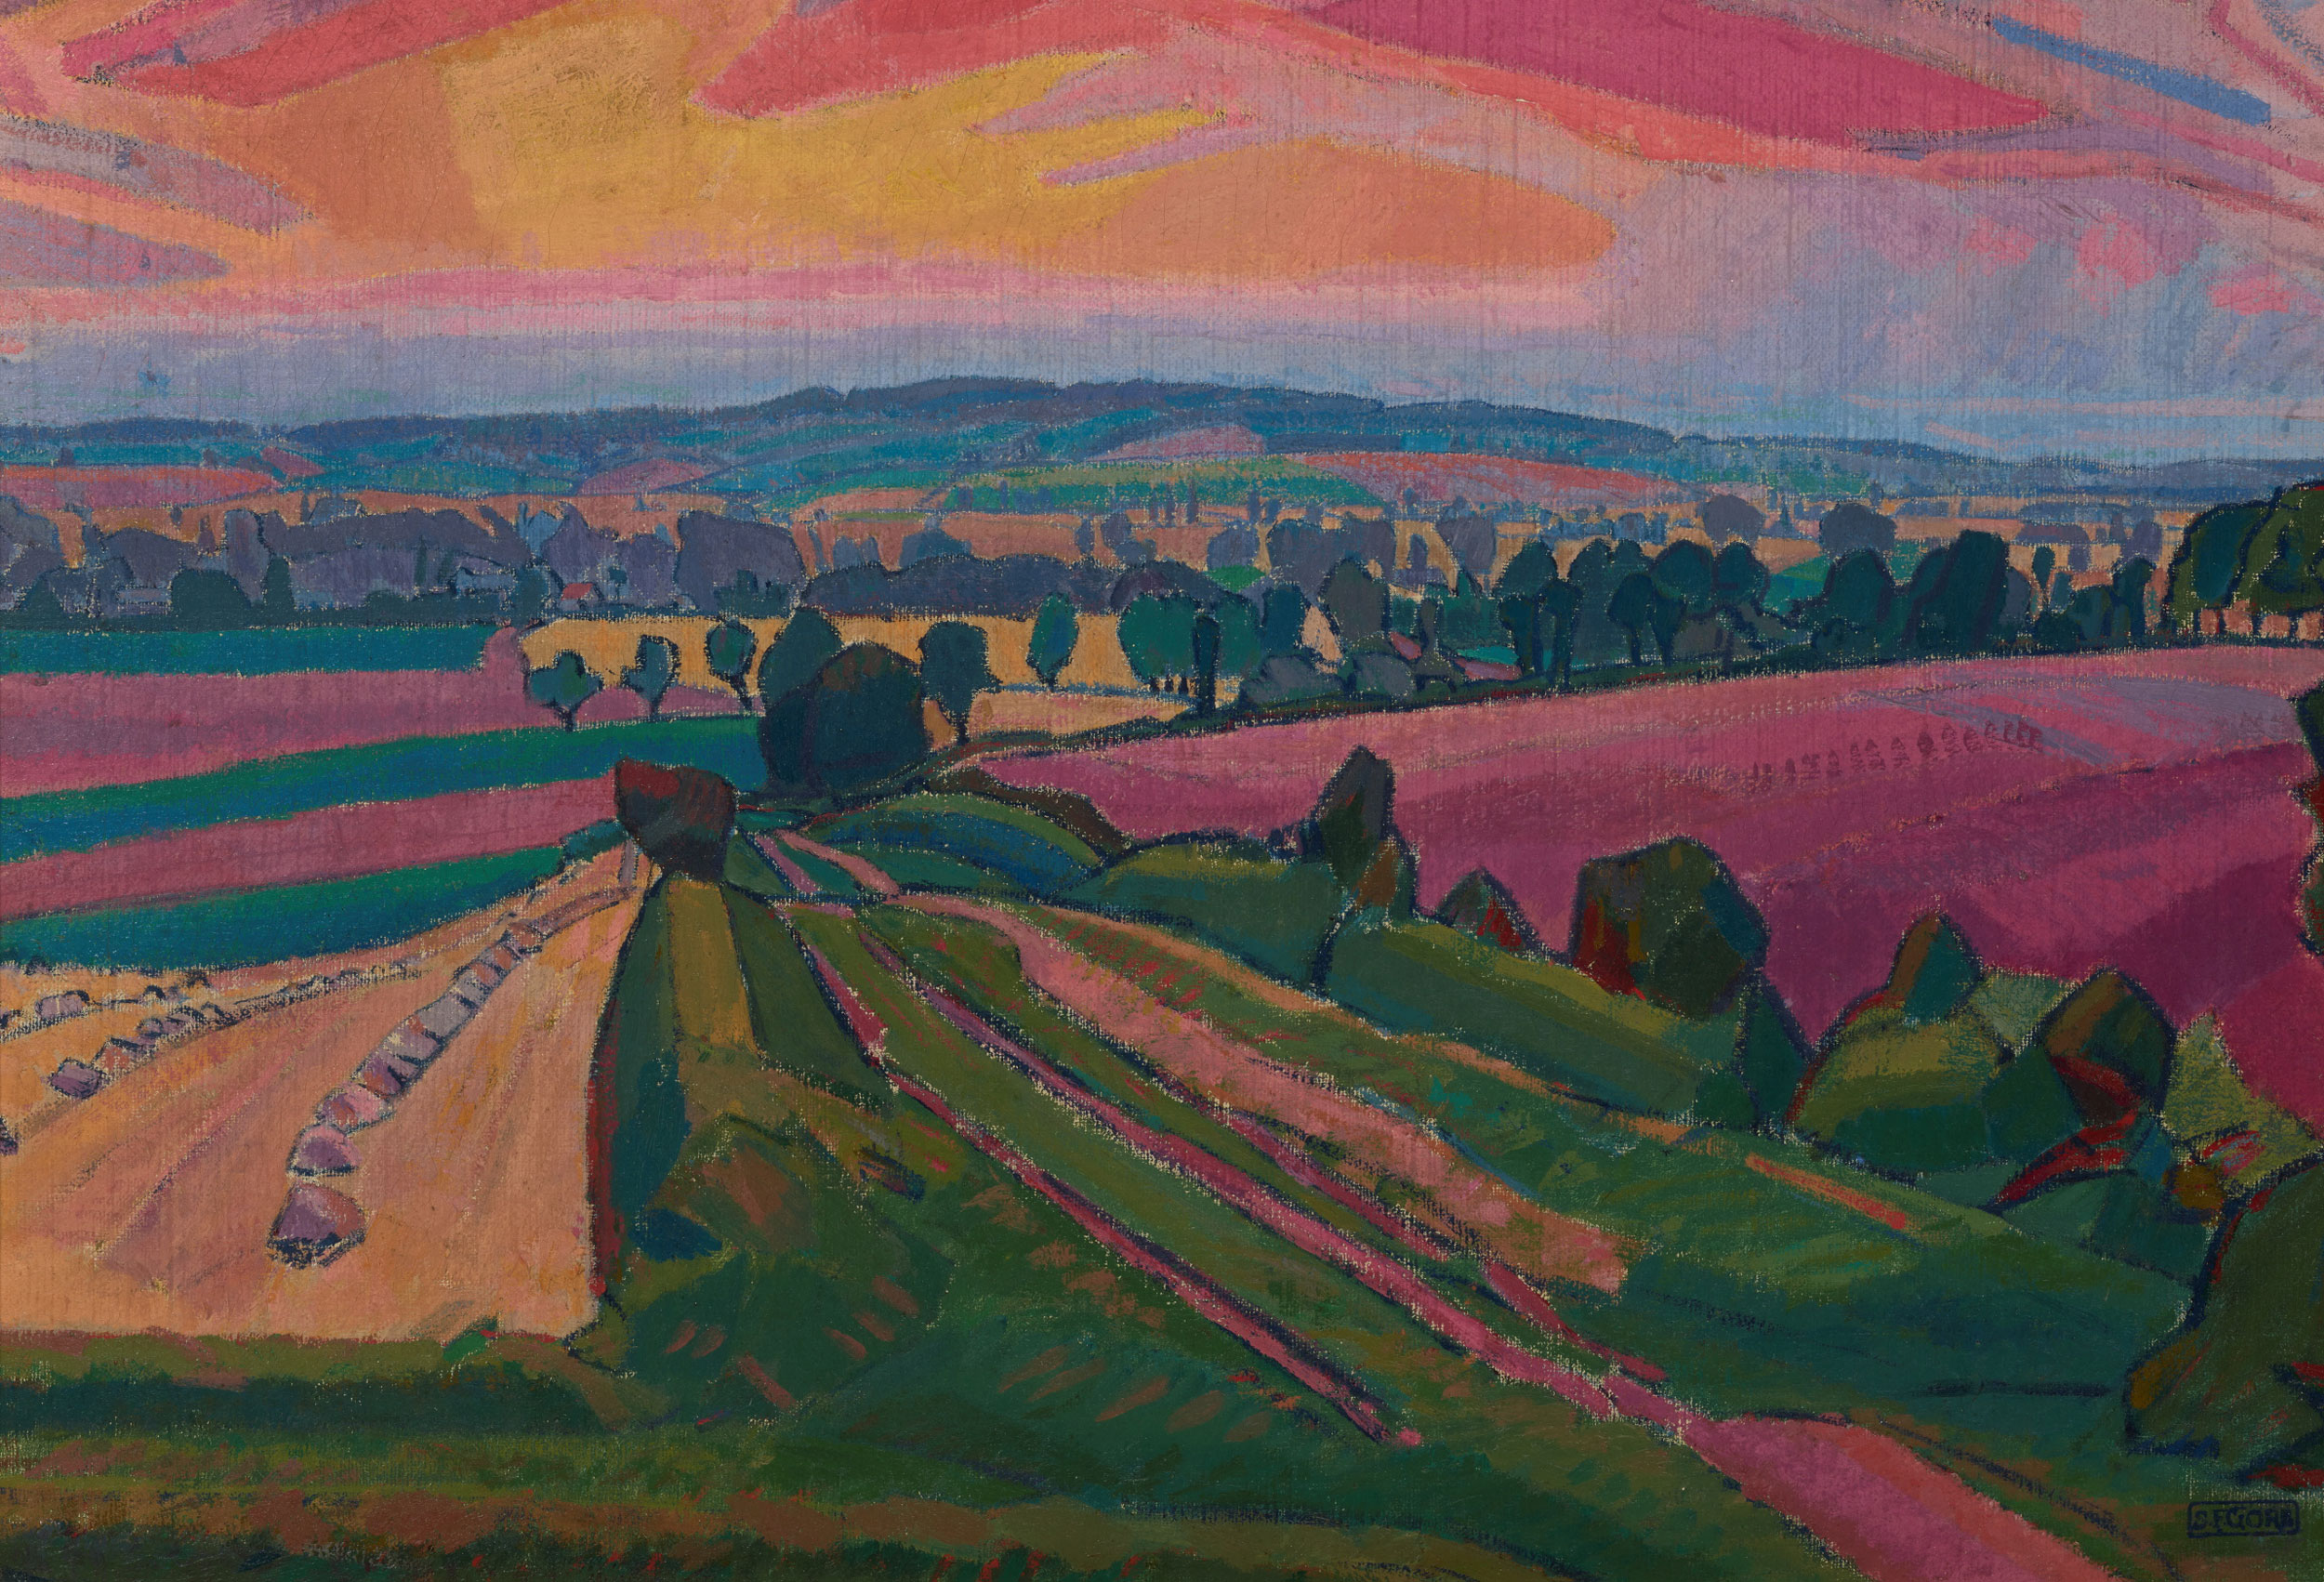 Spencer Gore The Icknield Way 1912 (detail), Art Gallery of New South Wales